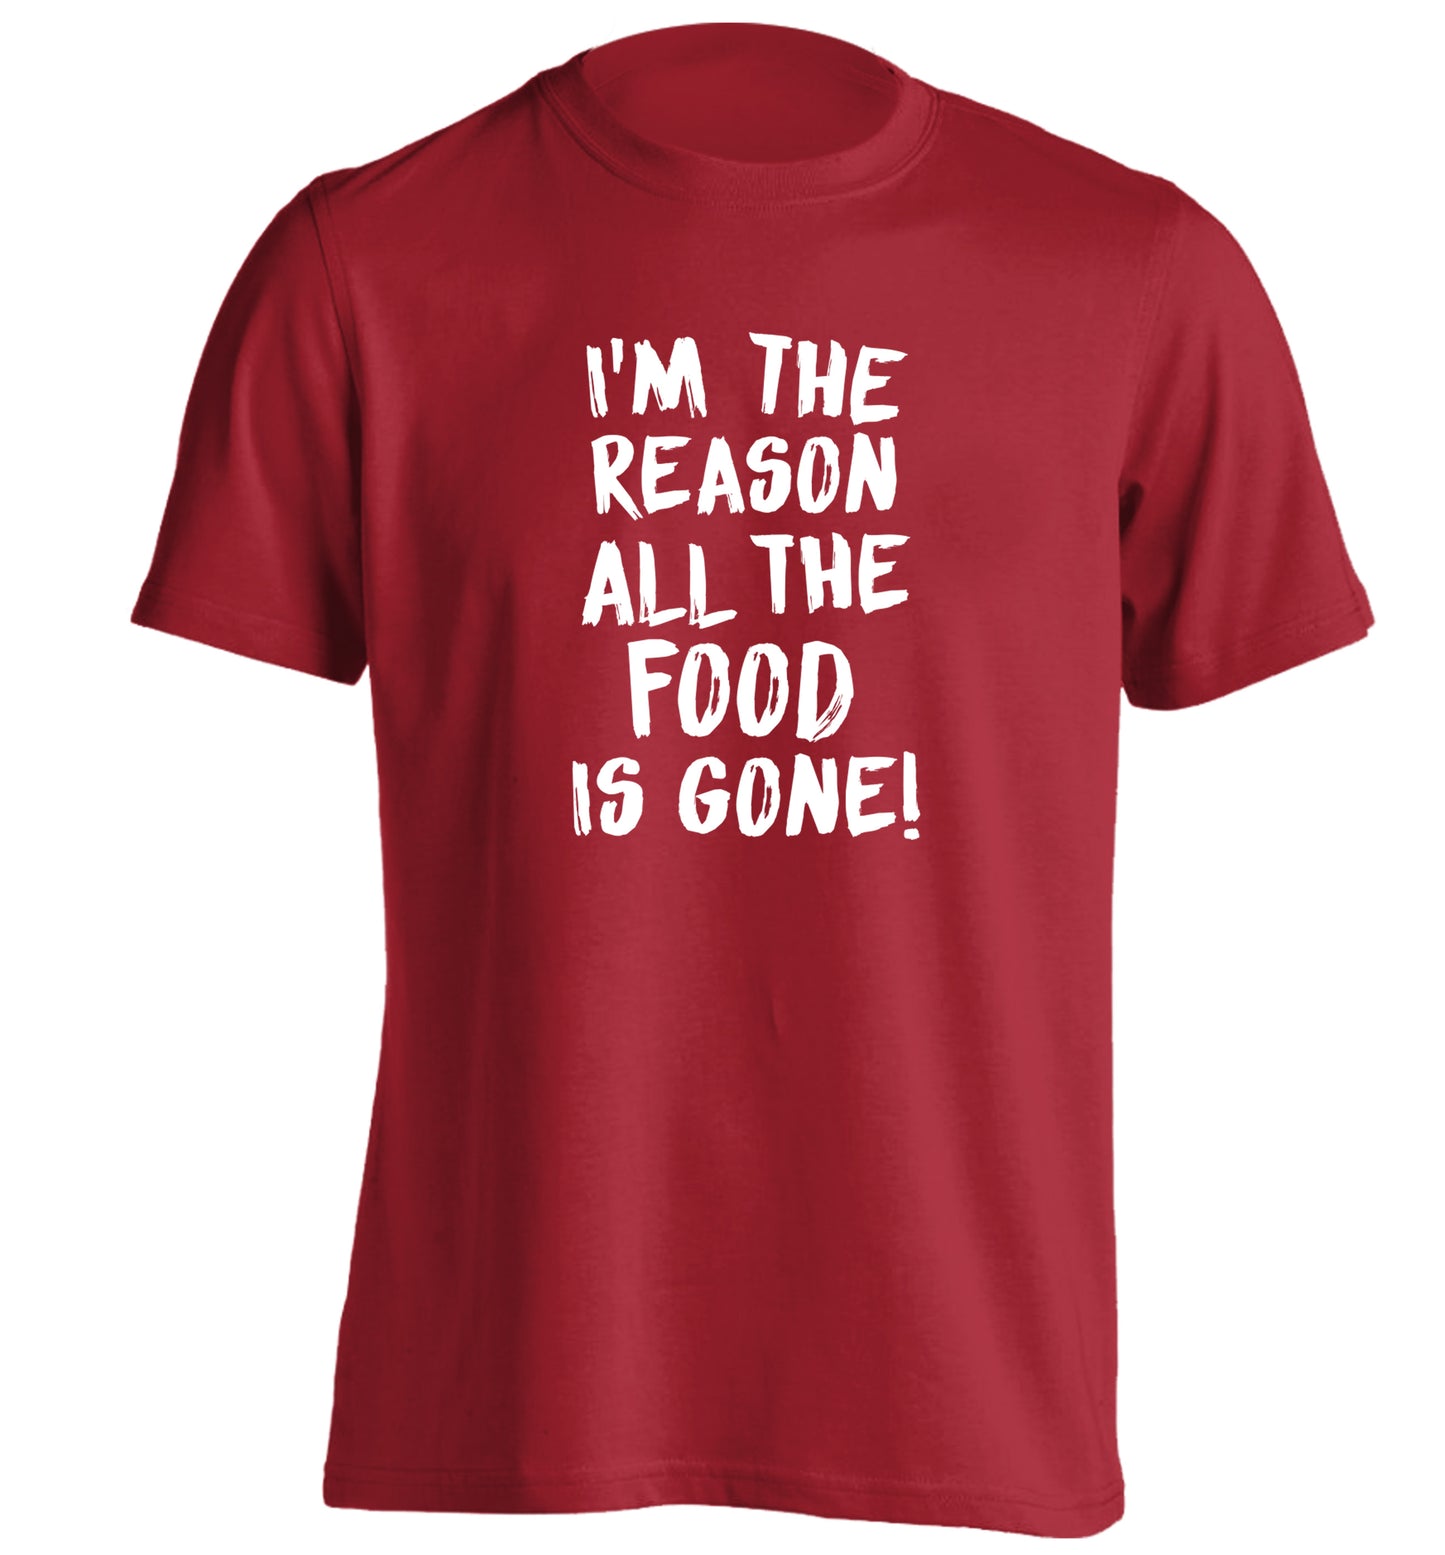 I'm the reason why all the food is gone adults unisex red Tshirt 2XL